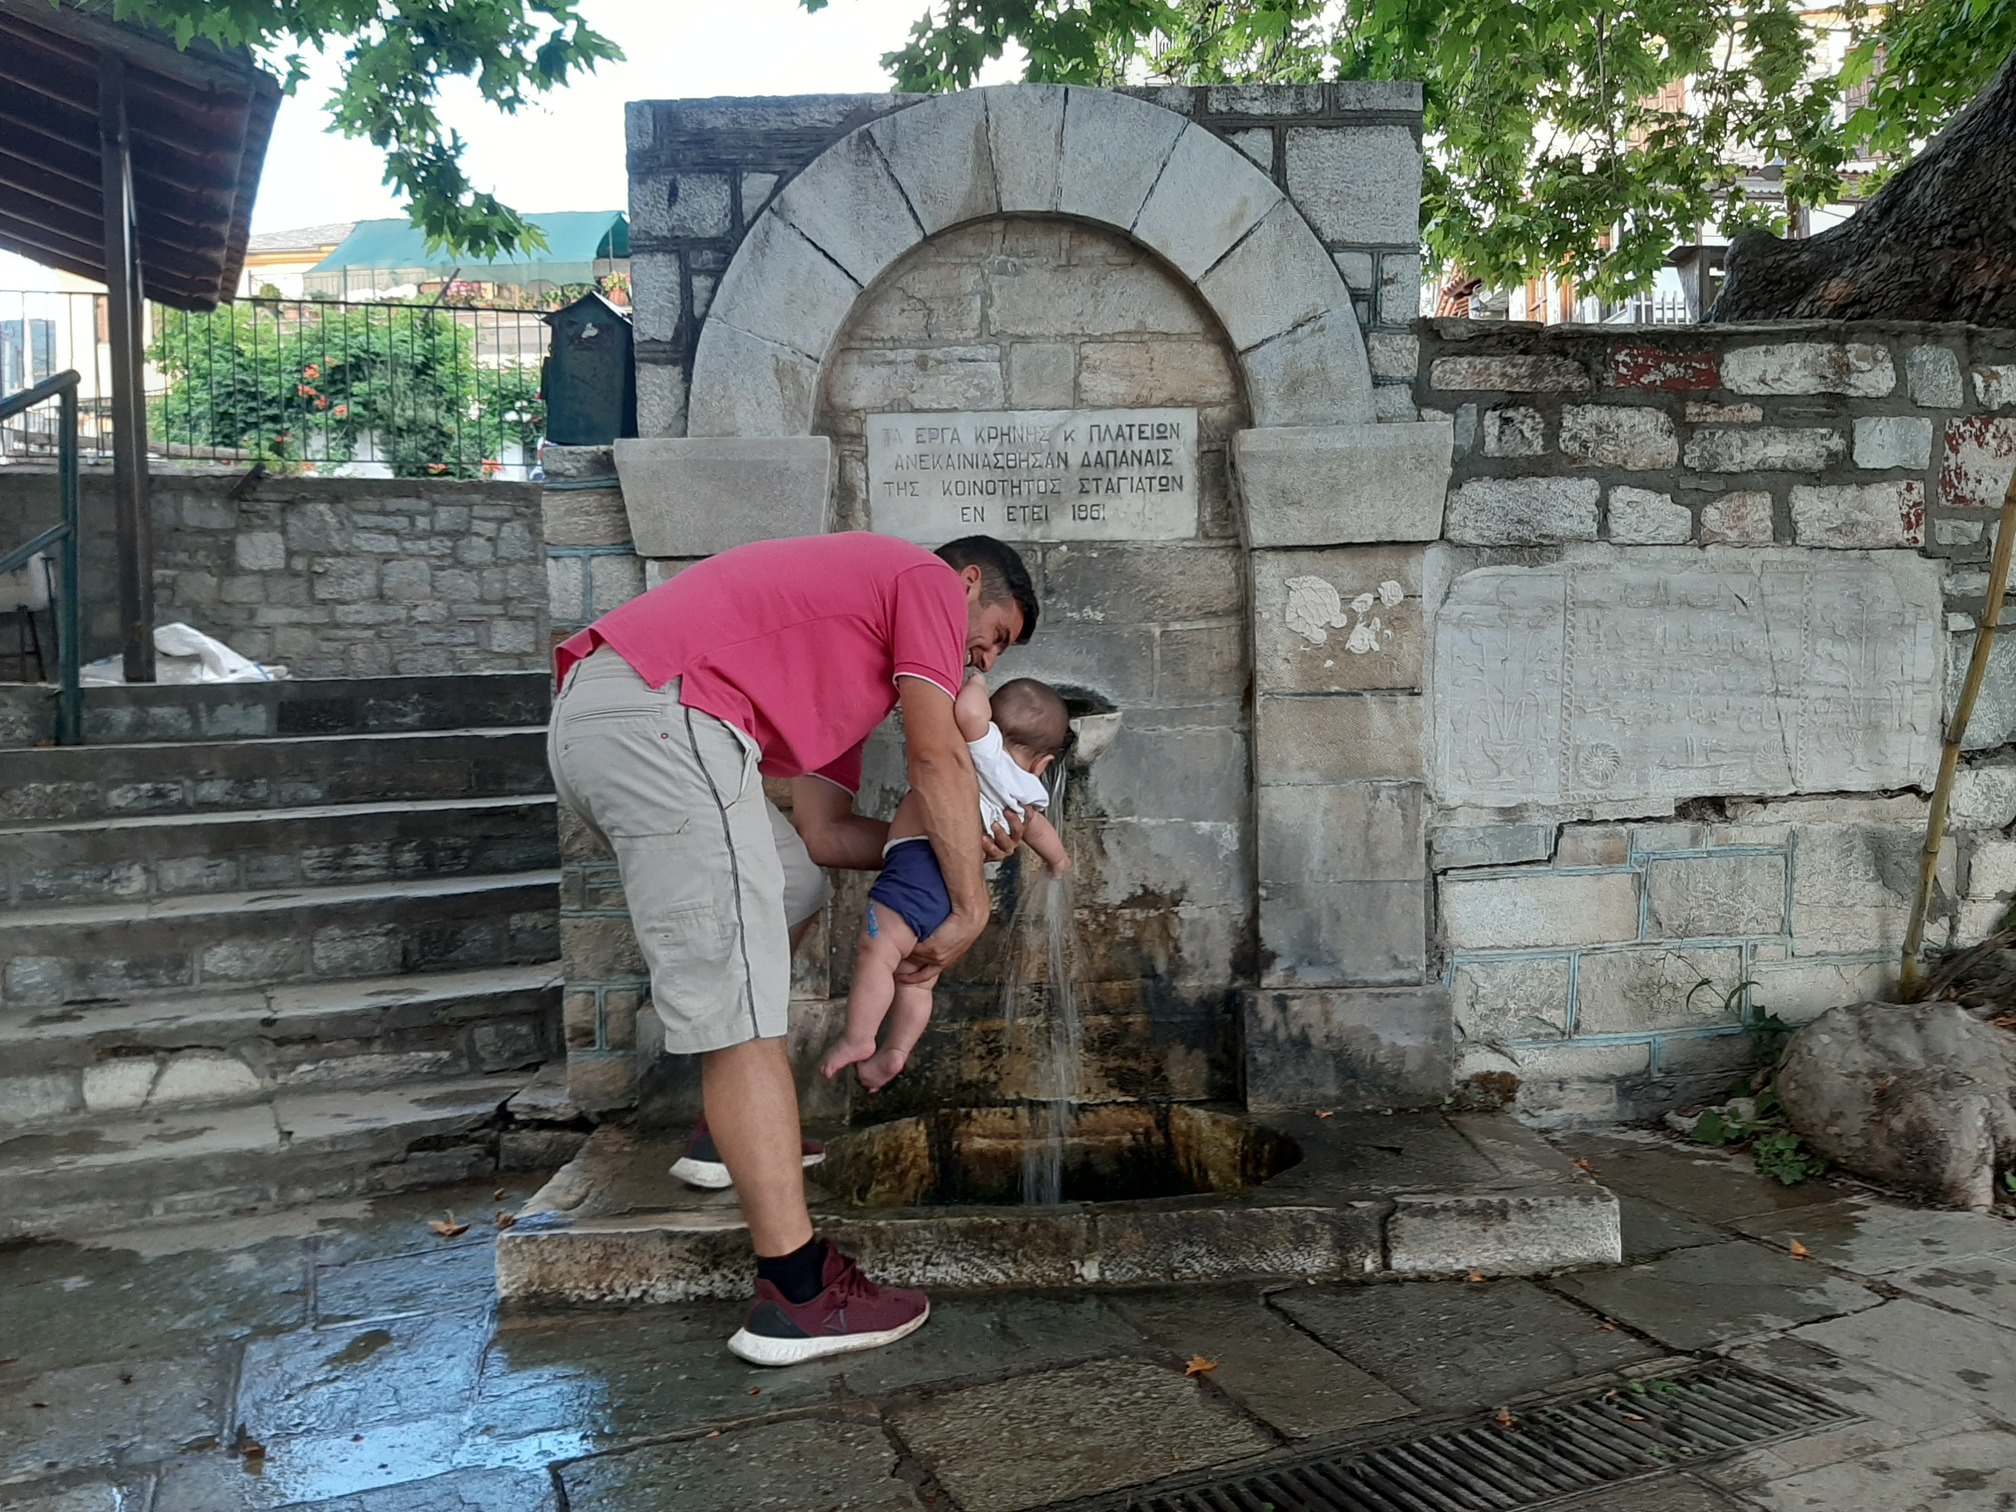 The public fountains where the inhabitants get the water, the only ones left connected to the village's springs